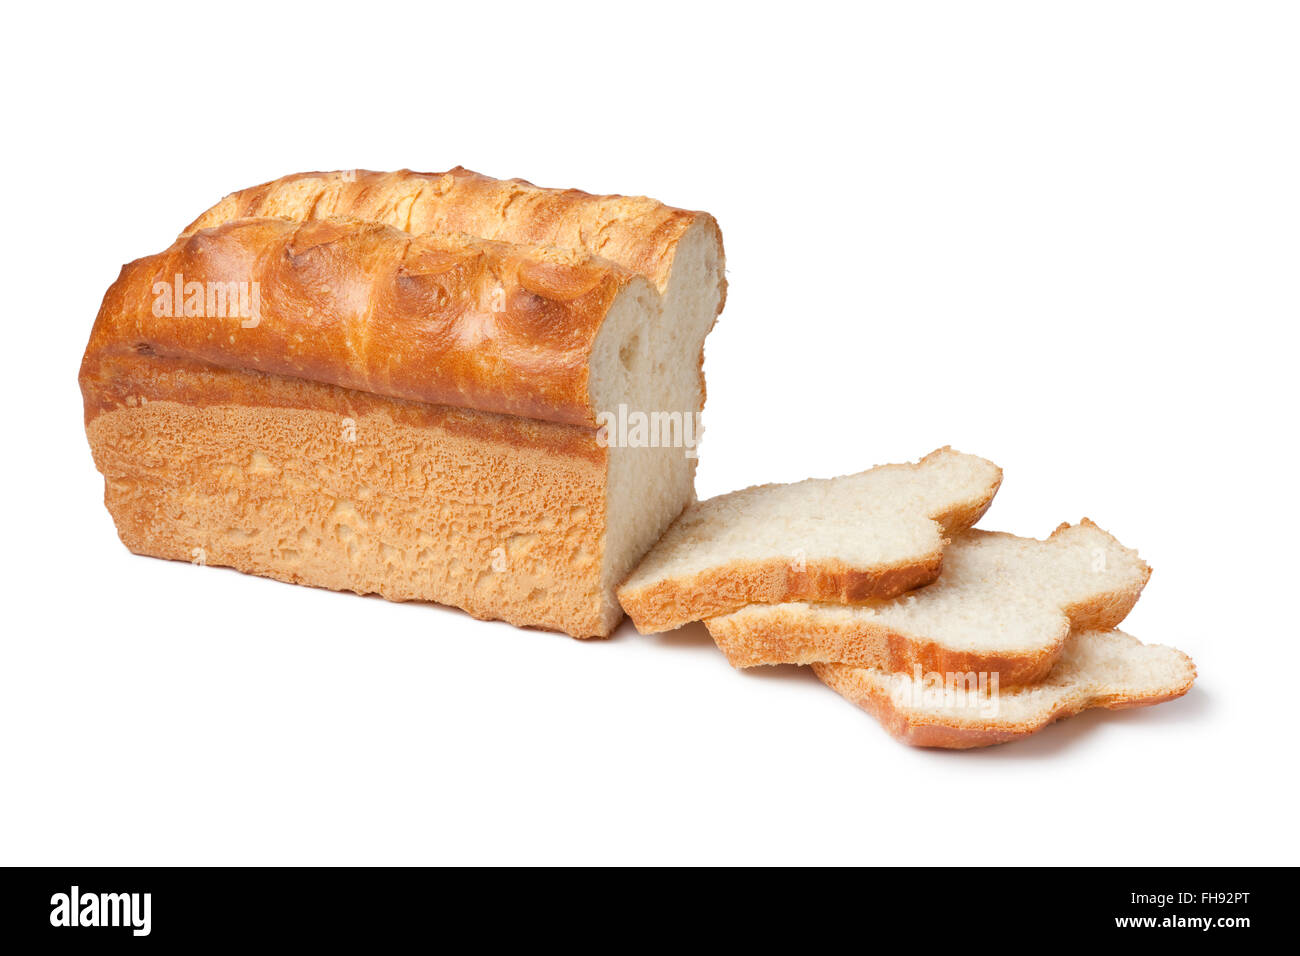 Loaf of fresh white bread with slices on white background Stock Photo